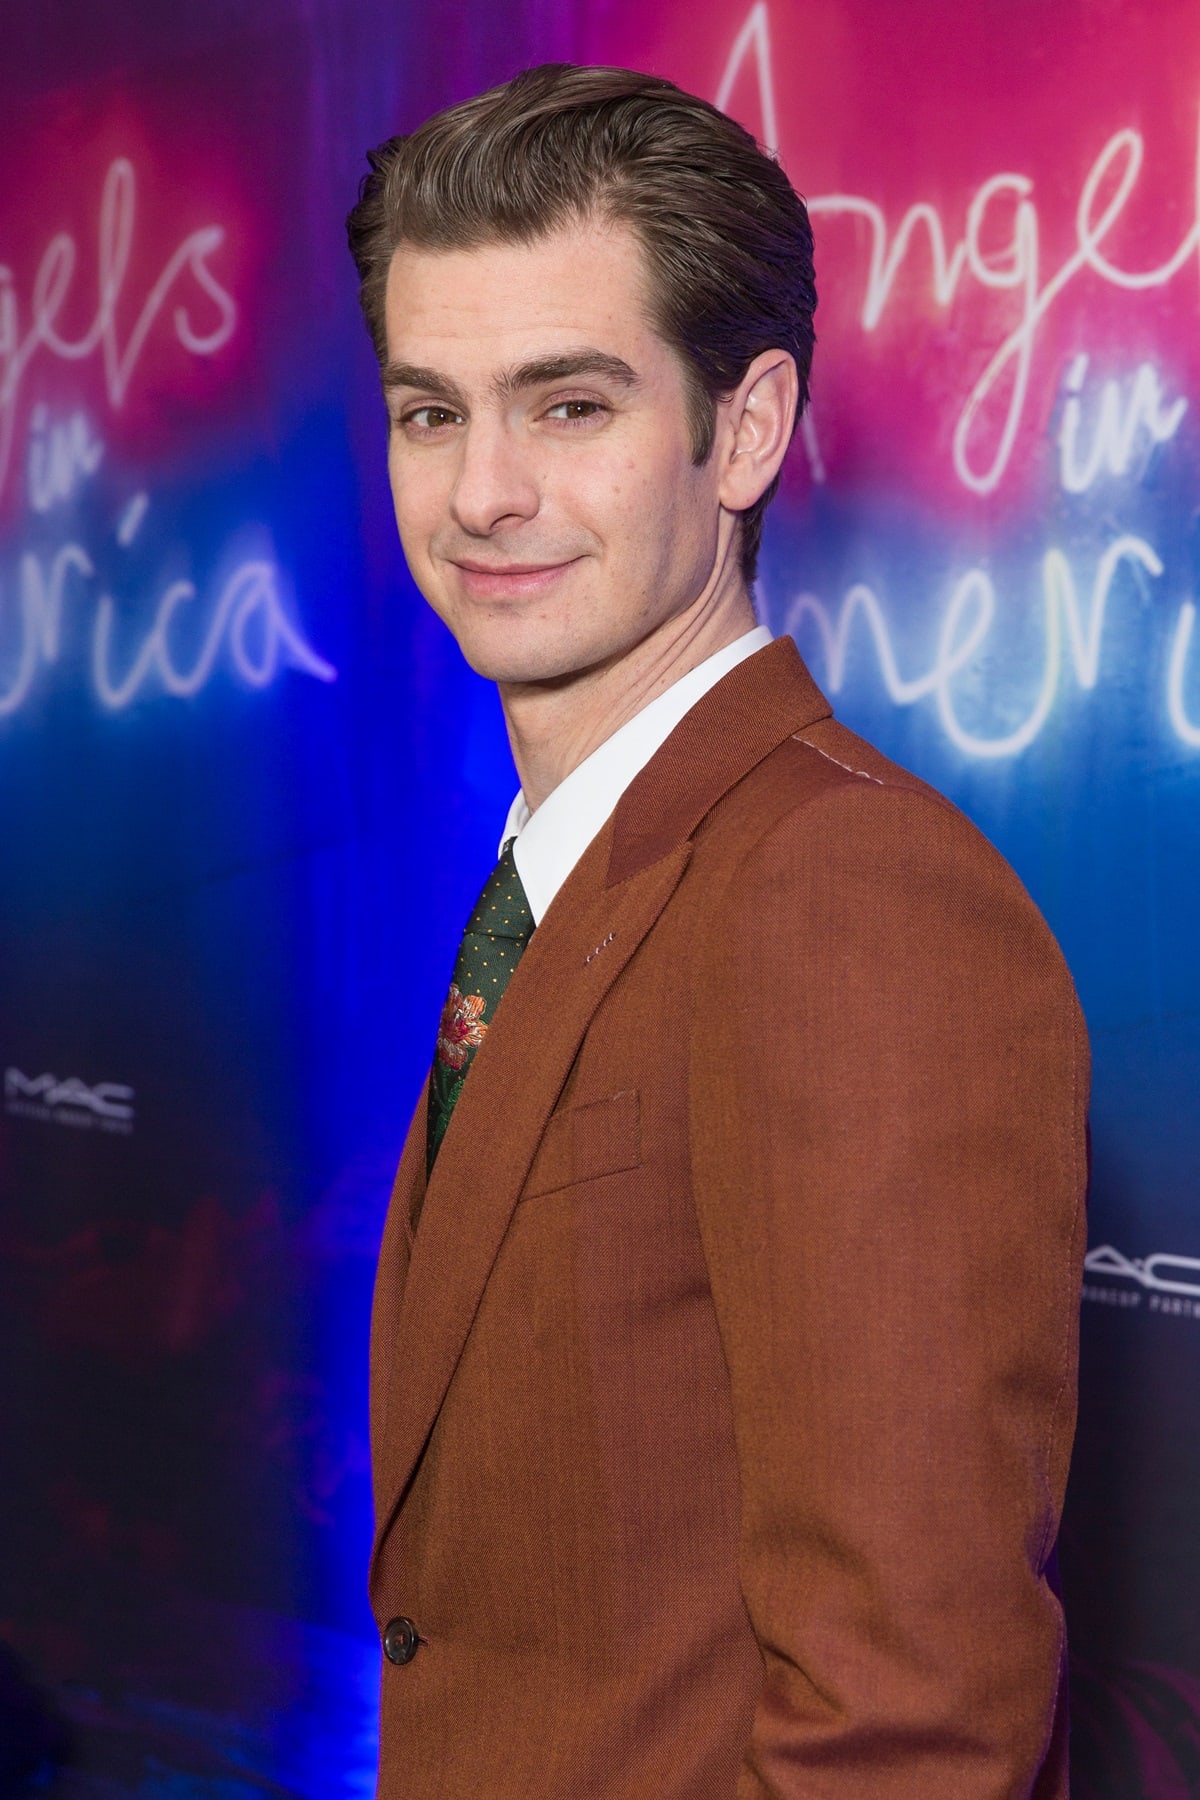 Andrew Garfield attending the revival of Angels of America afterparty at Espace in New York City